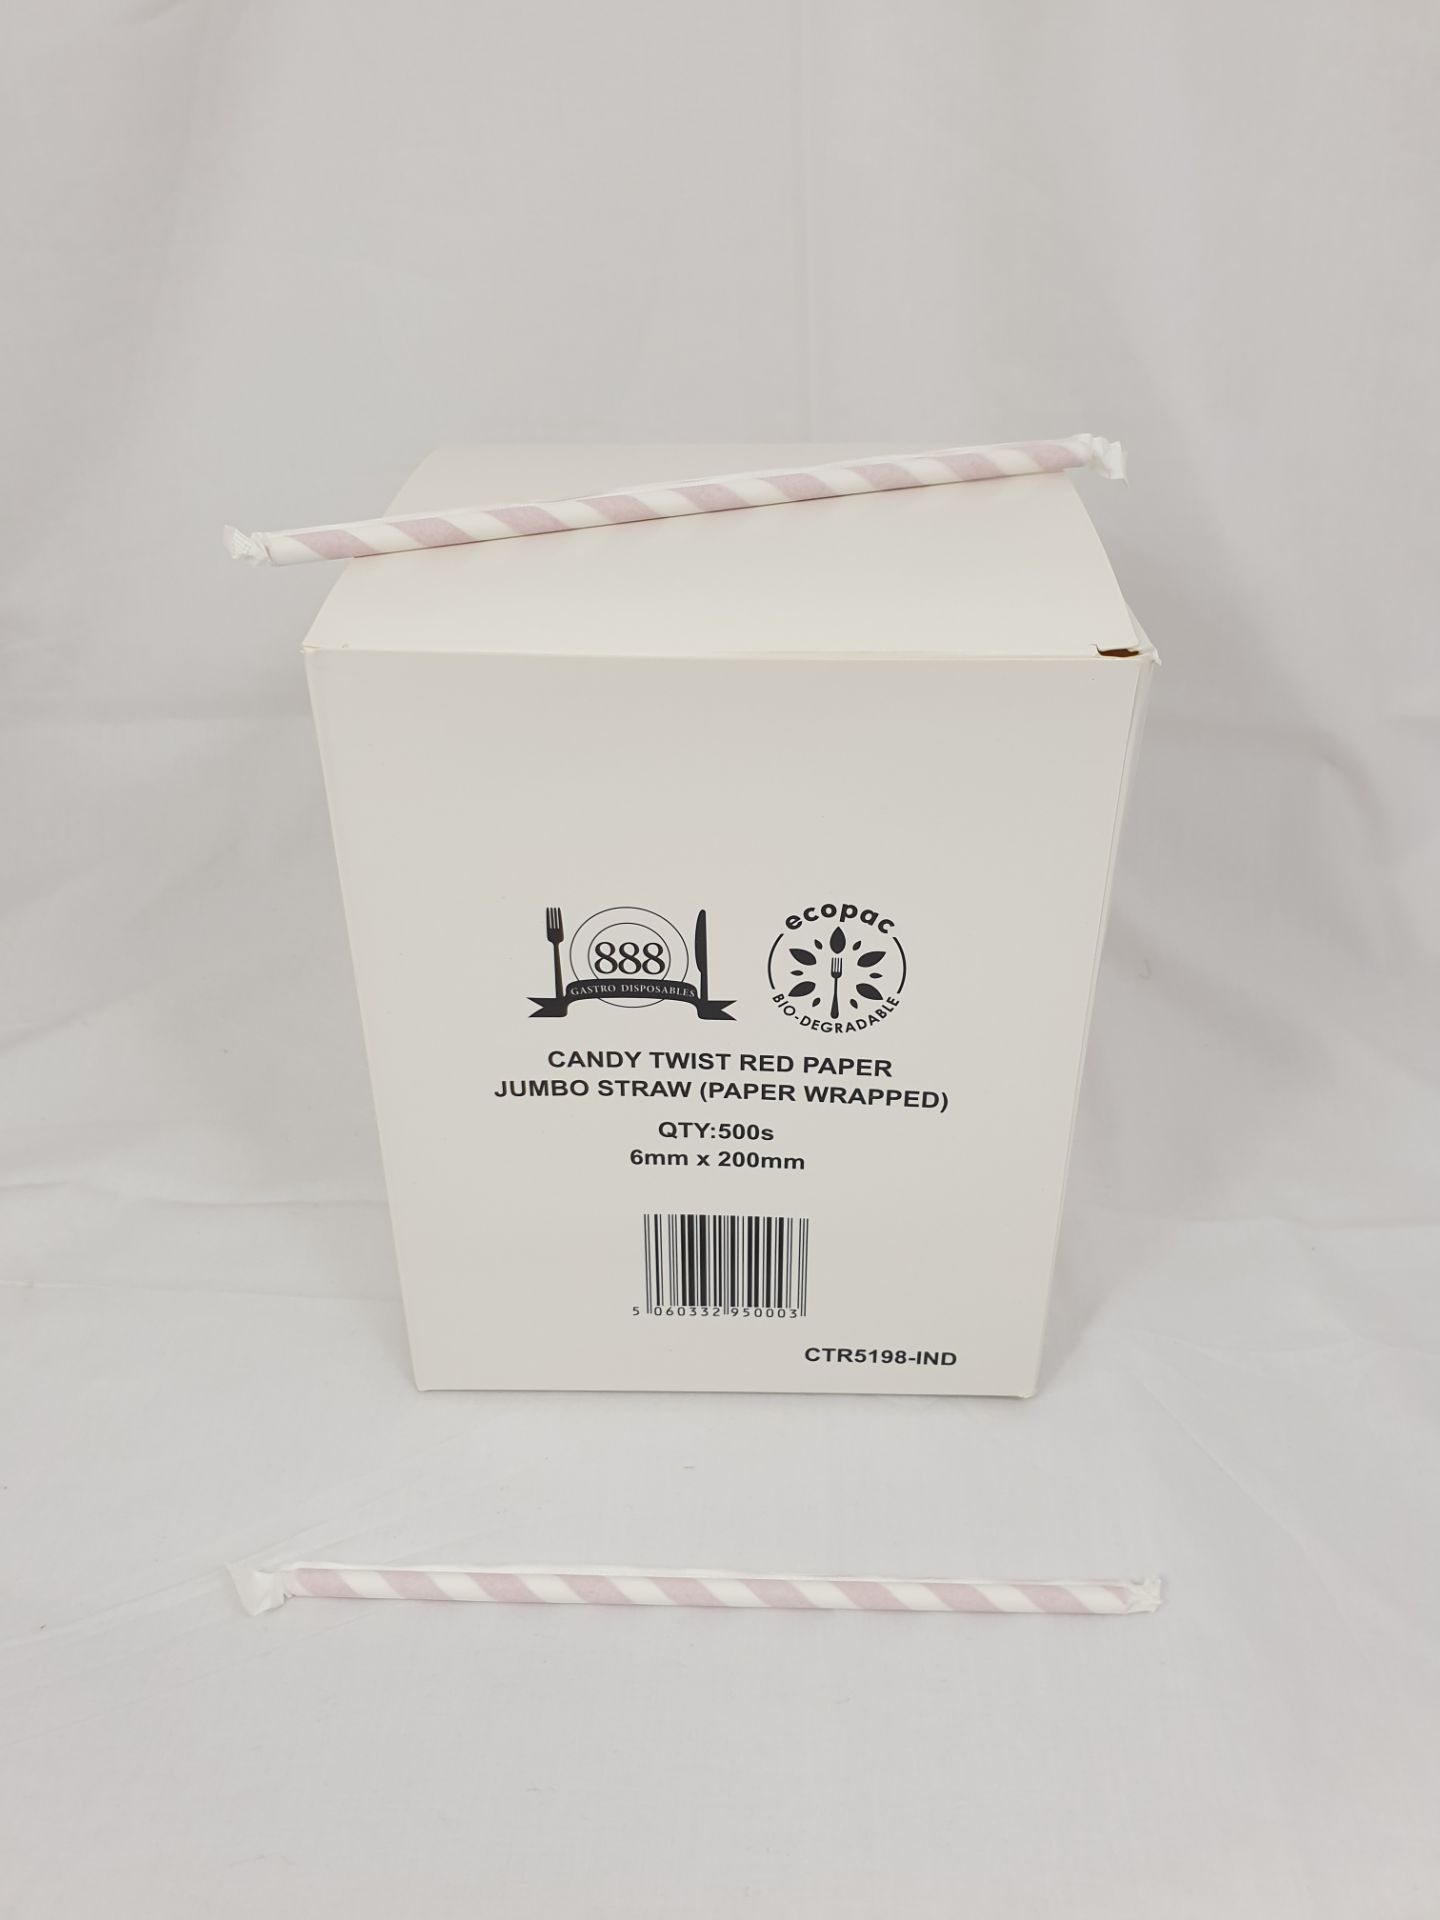 5 x Boxes of Candy Twist Paper Straws by 888 Gastro Disposables - Image 2 of 3